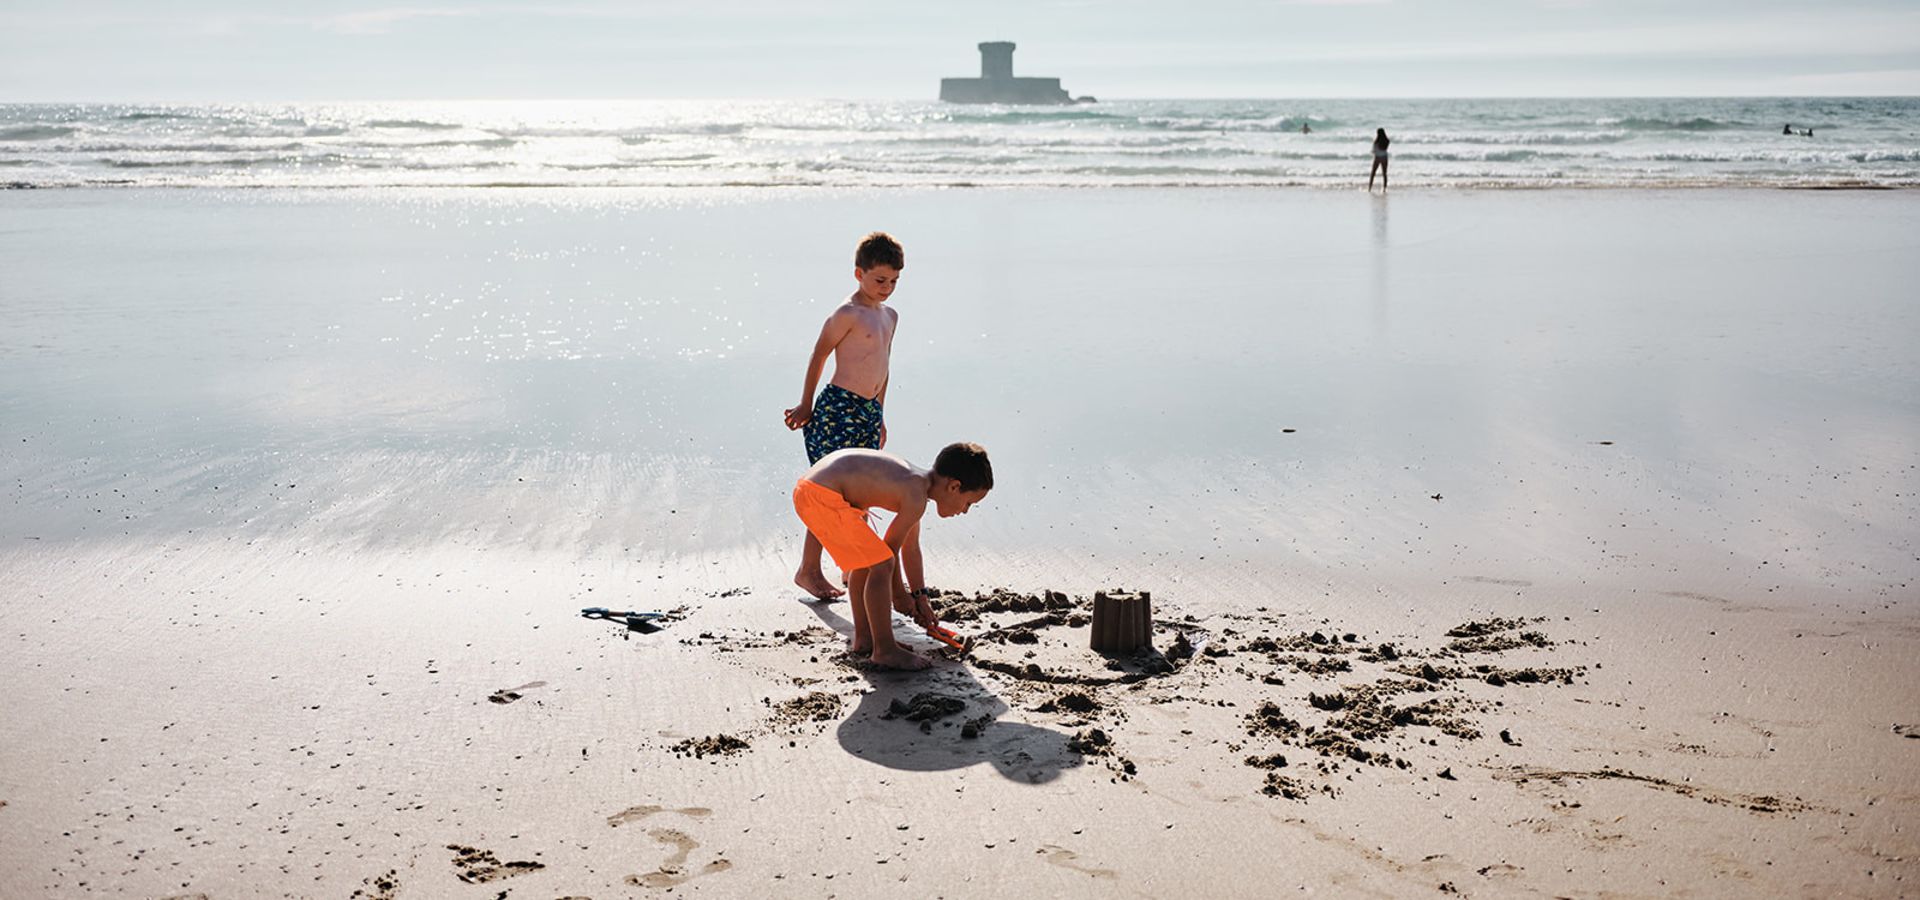 Two young boys building sandcastles on St. Ouen